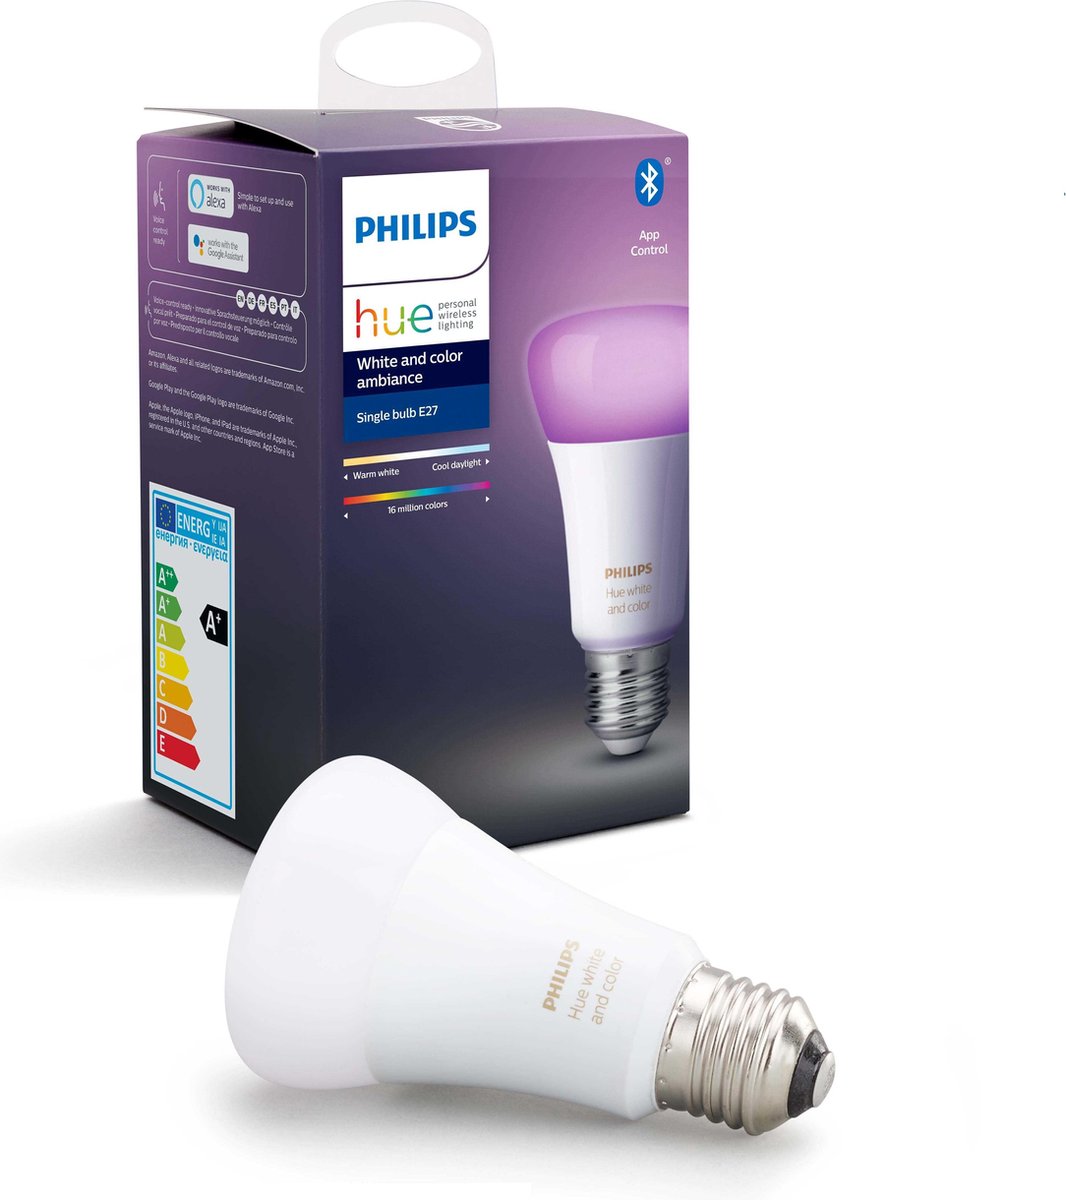 woede mat Inpakken Philips Hue Slimme Lichtbron E27 - White and Color Ambiance - 9W -  Bluetooth | bol.com